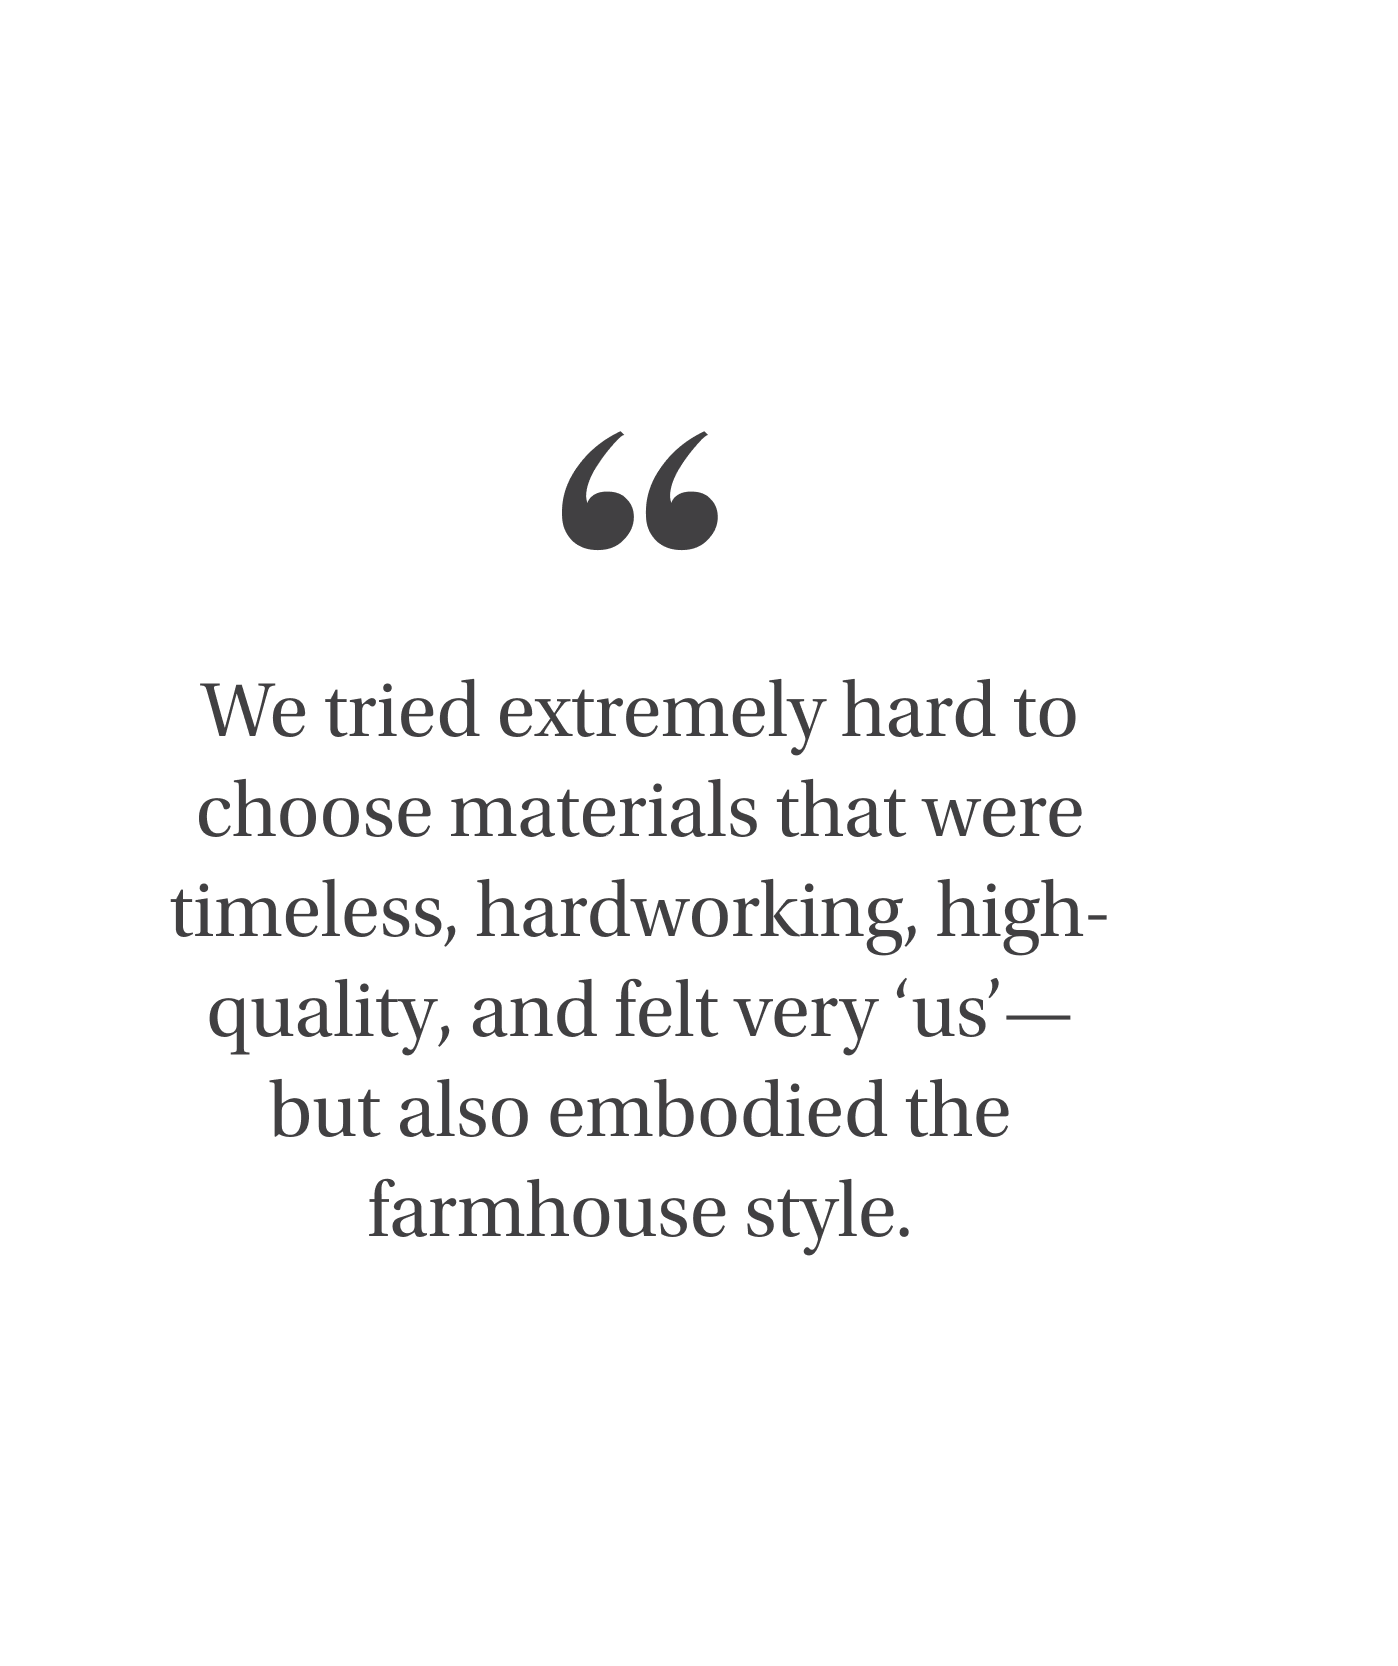 "We tried extremely hard to choose materials that were timeless, hardworking, high-quality, and felt very 'us' - but also embodied the farmhouse style." - Emily Henderson